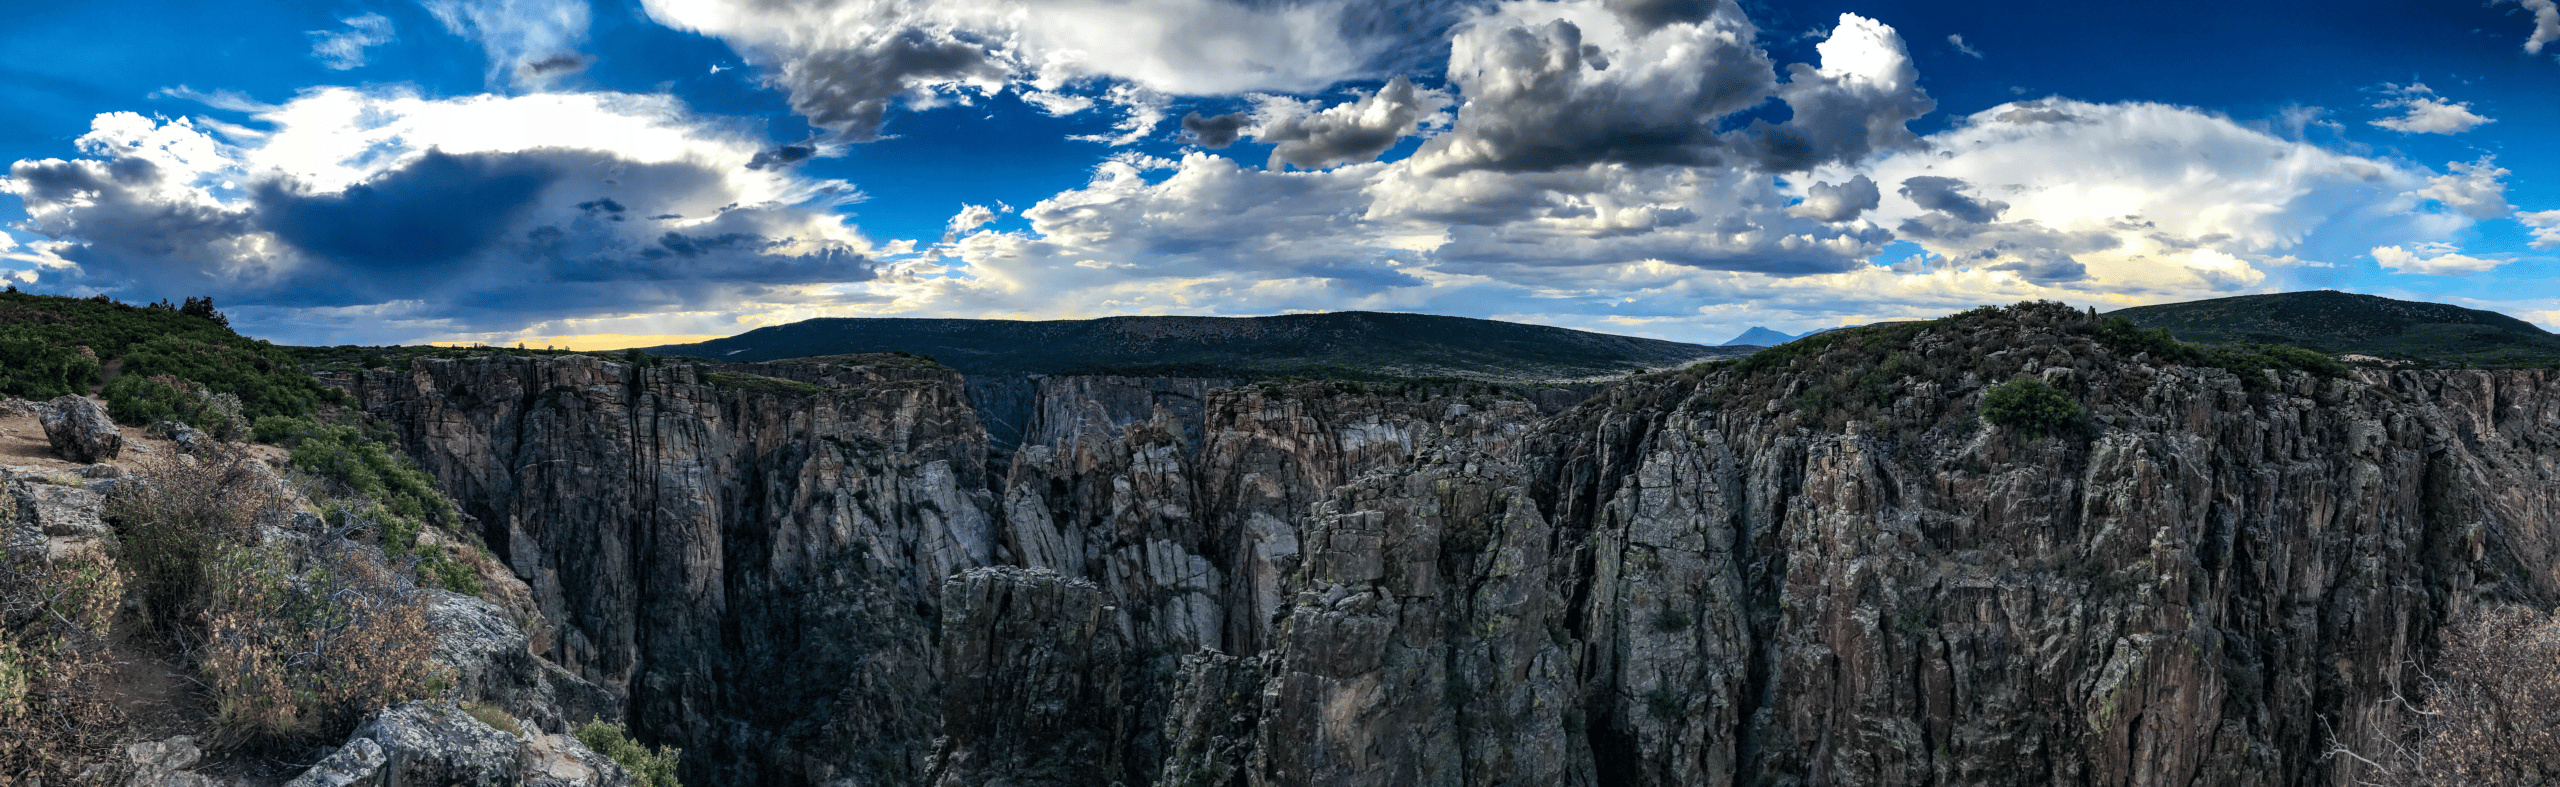 Black Canyon of the Gunnison at sunset | Black Canyon of the Gunnison Facts